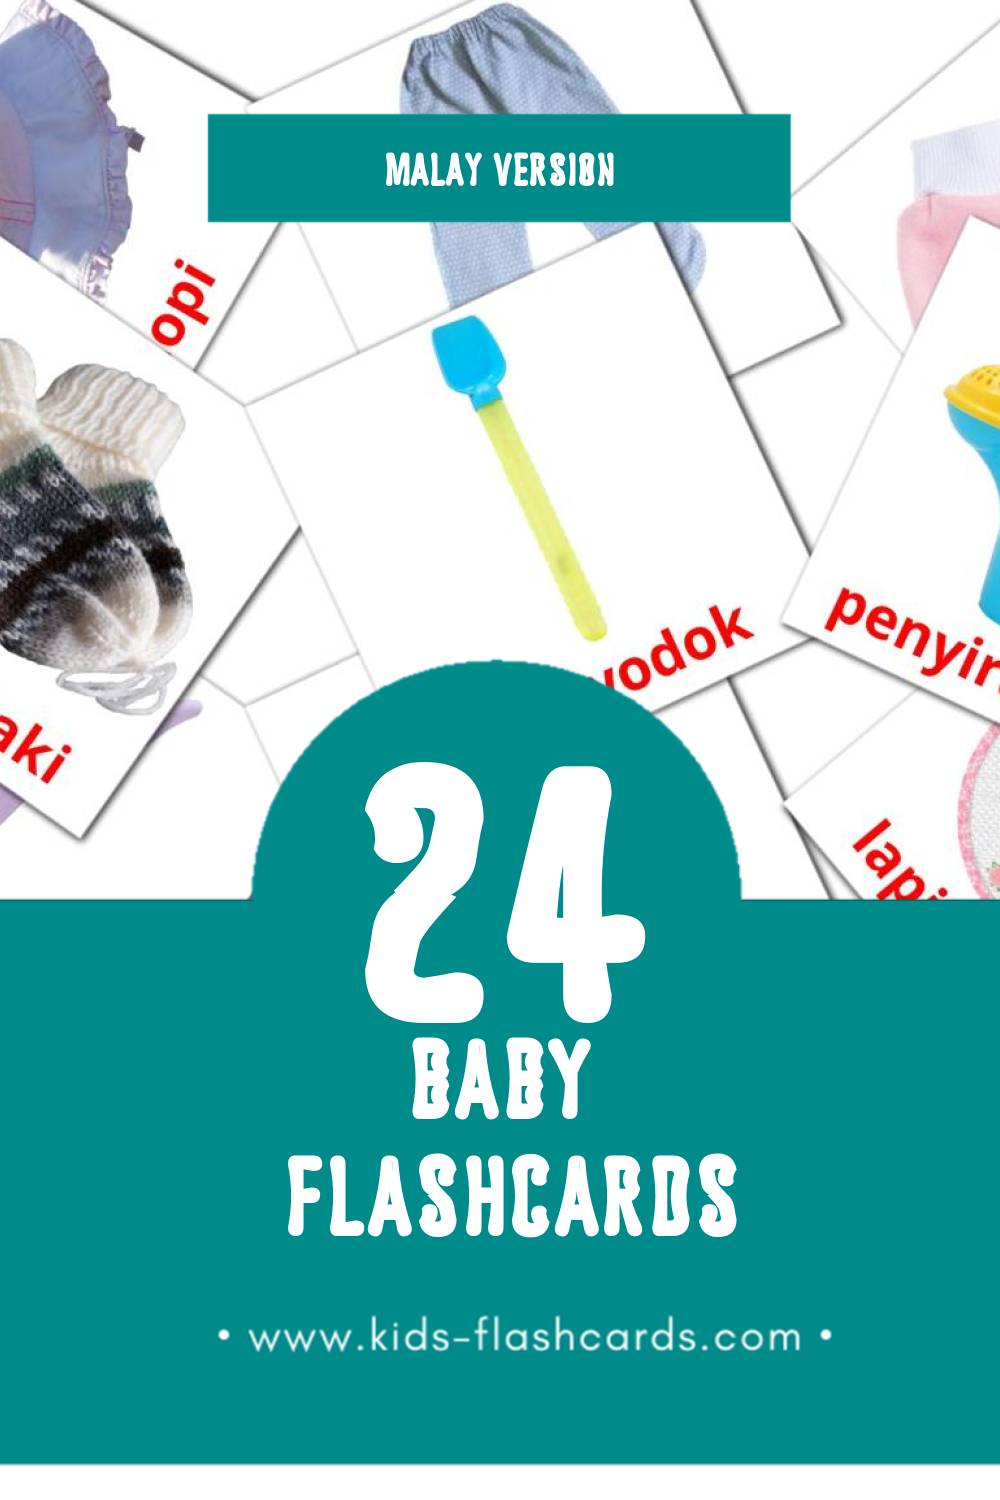 Visual Bayi Flashcards for Toddlers (13 cards in Malay)